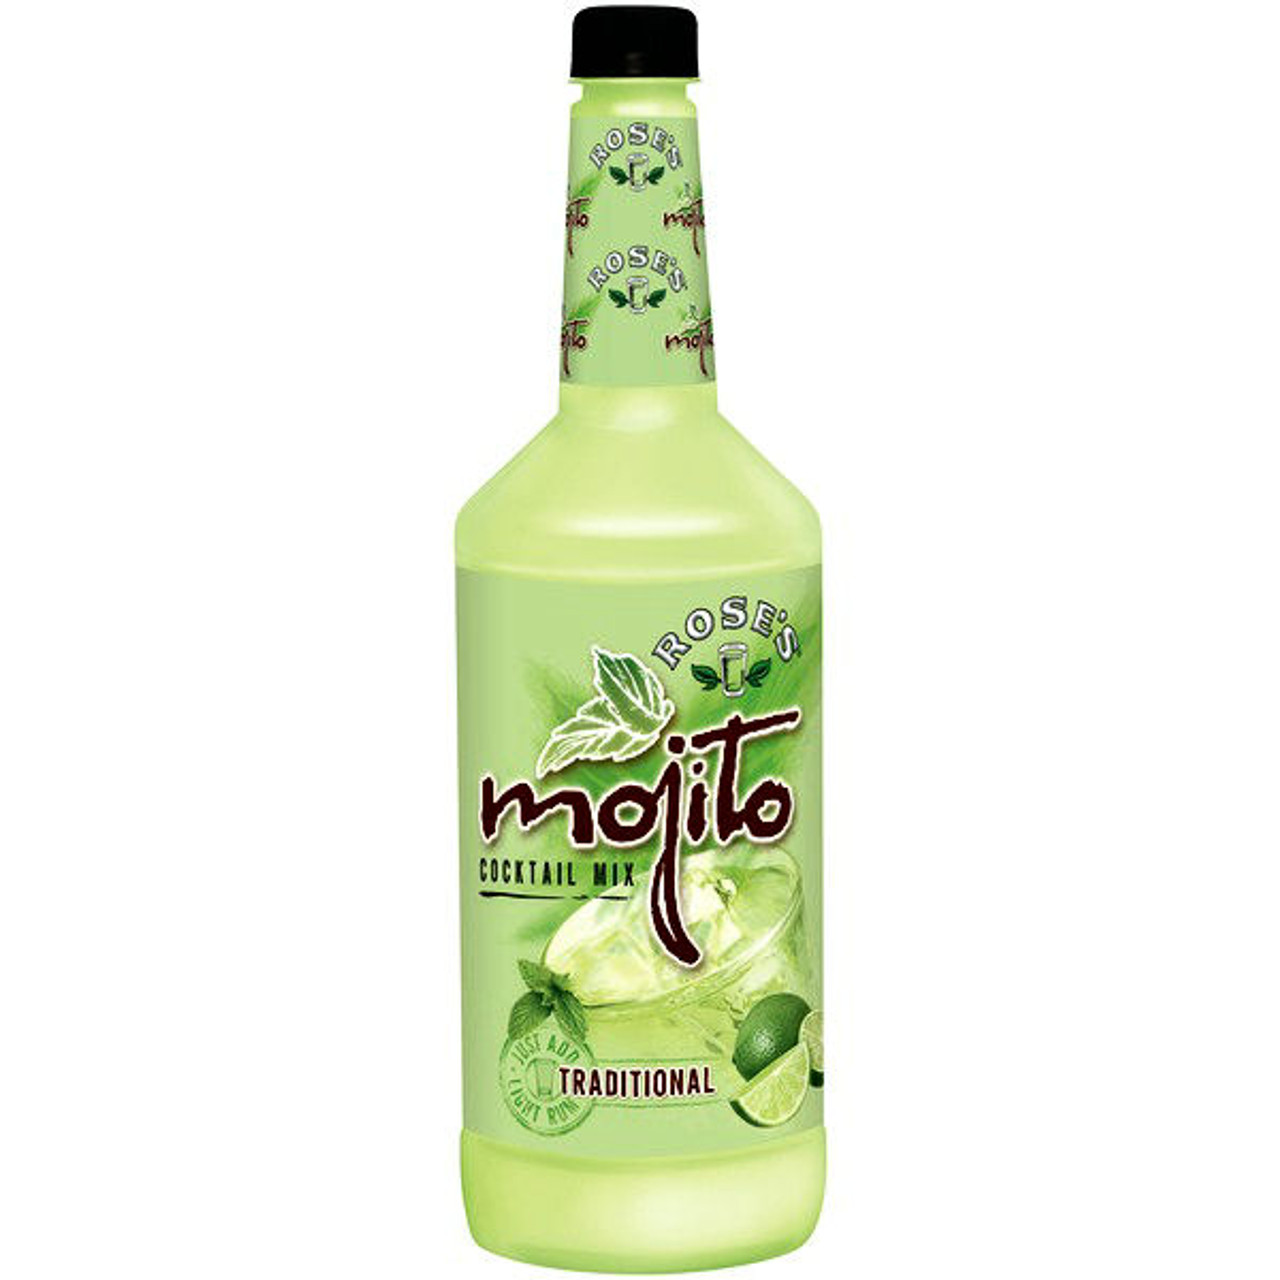 Traditional Mojito Cocktail Mix